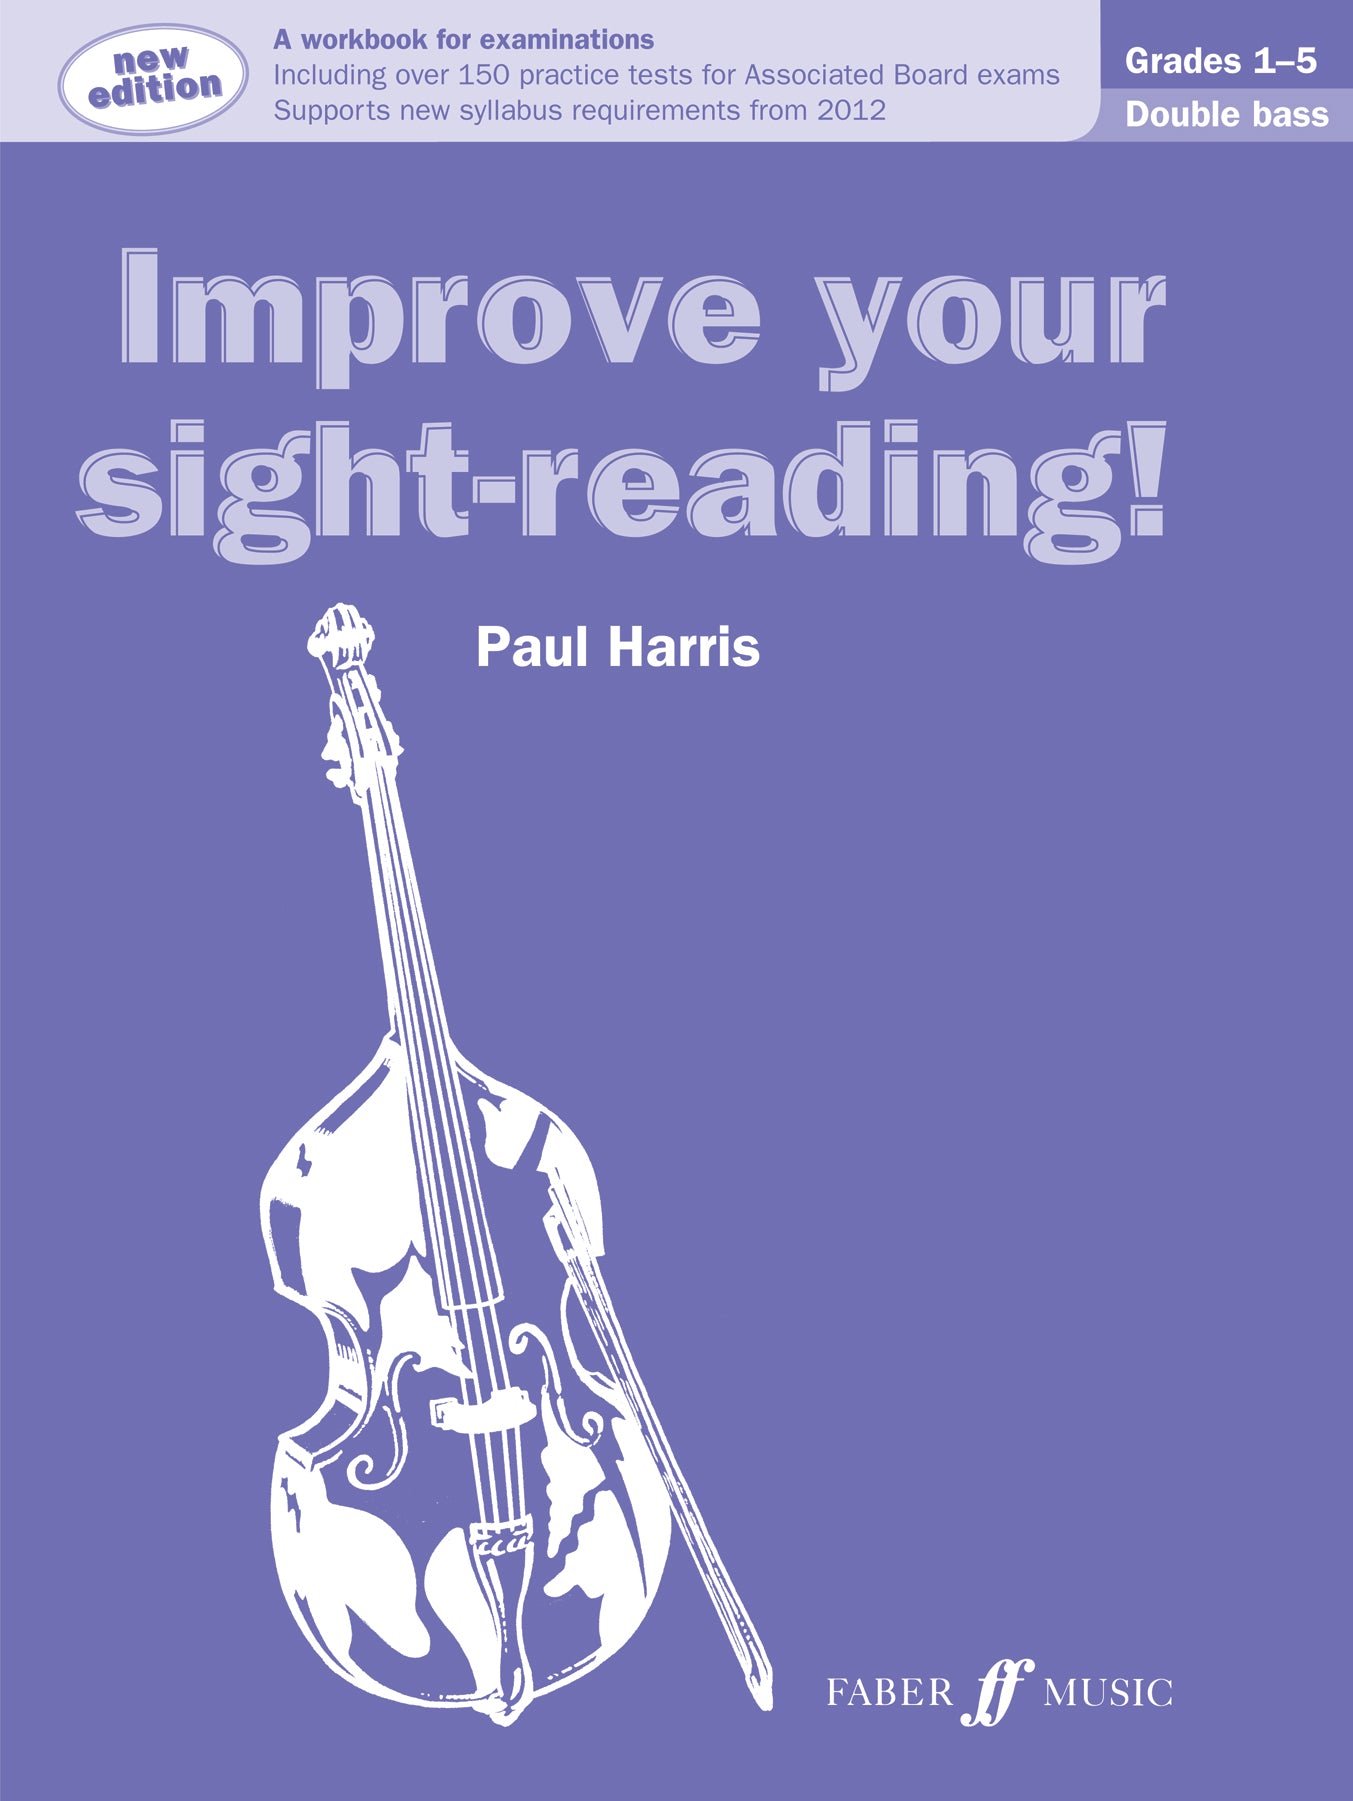 Improve Your Sight-Reading! Double Bass Grades 1-5